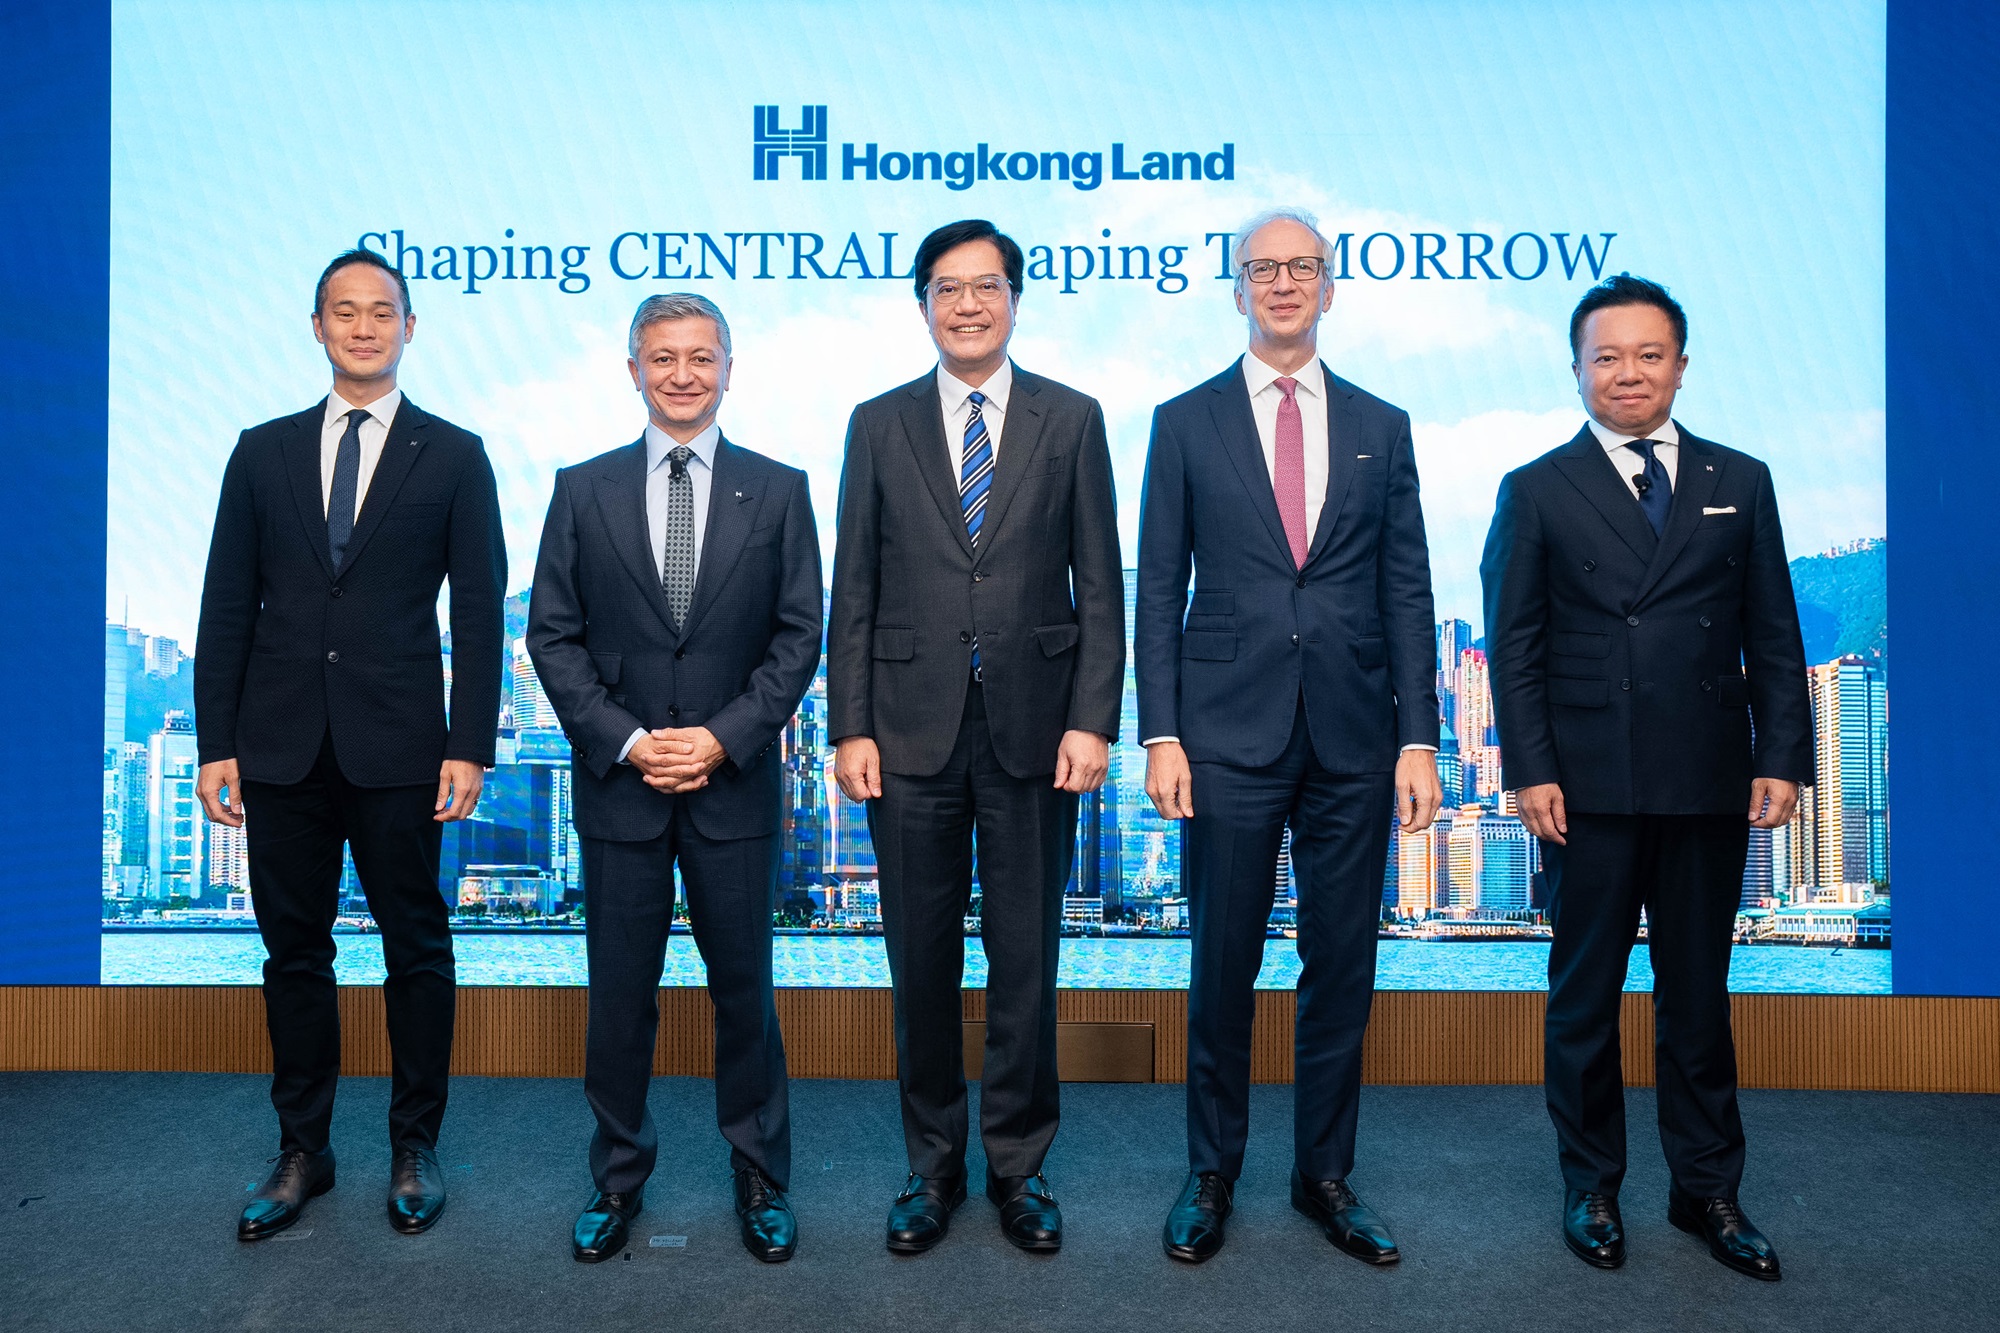 Alexander Li, Chief Retail Officer, Commercial Property, Hong Kong & Macau, Hongkong Land; Michael Smith, Chief Executive, Hongkong Land; The Hon Michael WONG Wai-lun, GBS, JP, Deputy Financial Secretary of the Government of the Hong Kong Special Administrative Region; John Witt, Group Managing Director, Jardine Matheson; and Alvin Kong, Executive Director, Hongkong Land (from left to right) attend the announcement event of Hongkong Land’s strategic investment in LANDMARK and the Central Portfolio. This move aims to reinforce the Group’s leadership in luxury retail, support the global expansion of its esteemed global brand partners and capitalise on the growing demand for luxury goods.